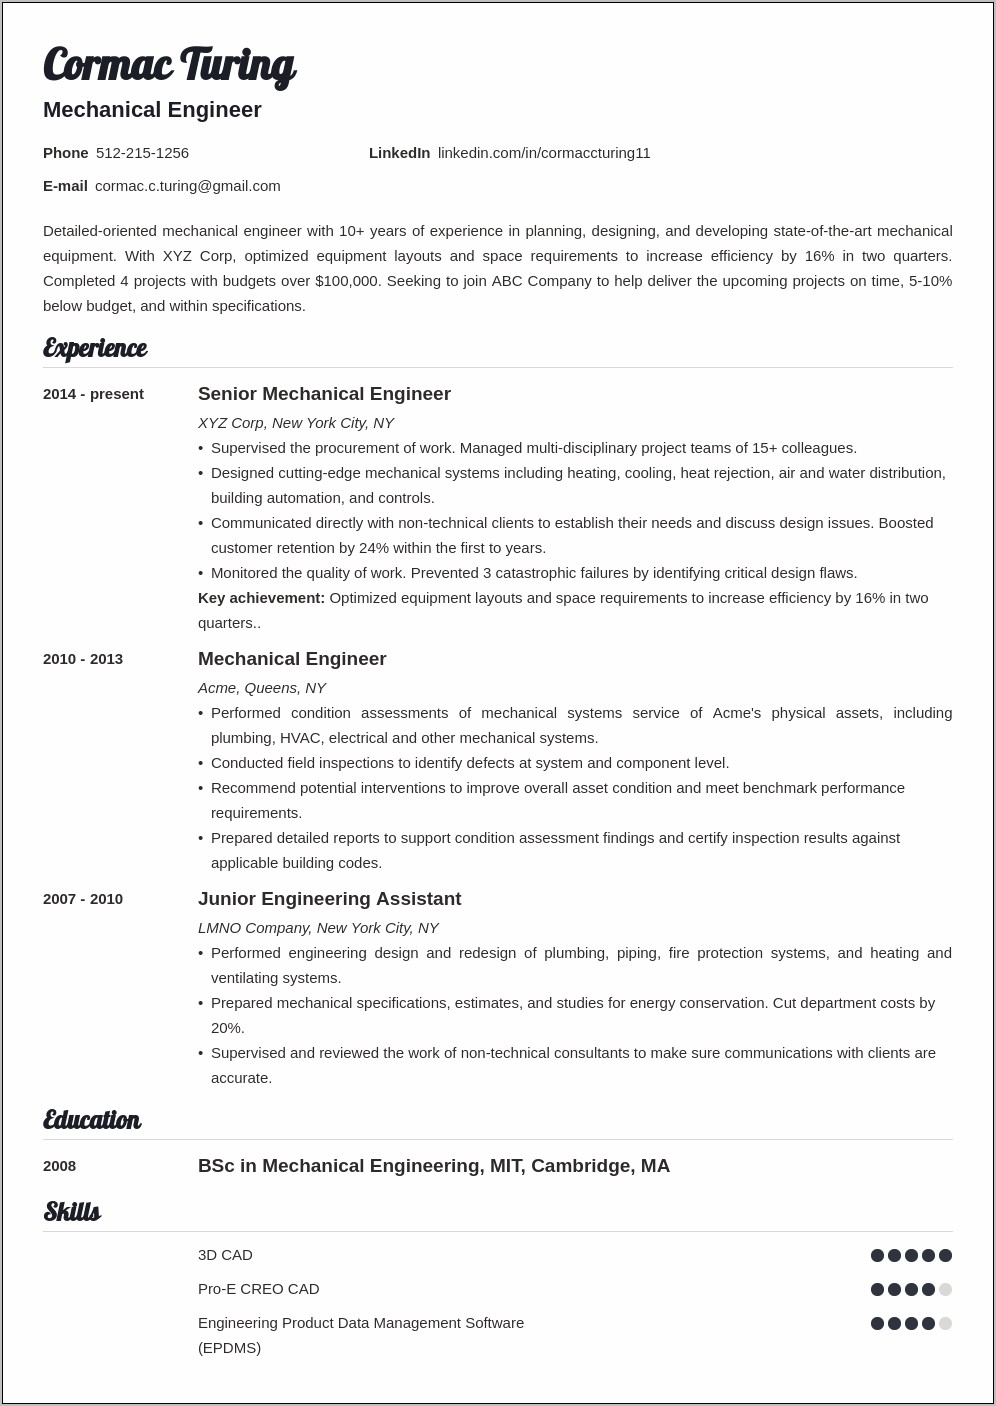 Sample Engineering Resume With Experience